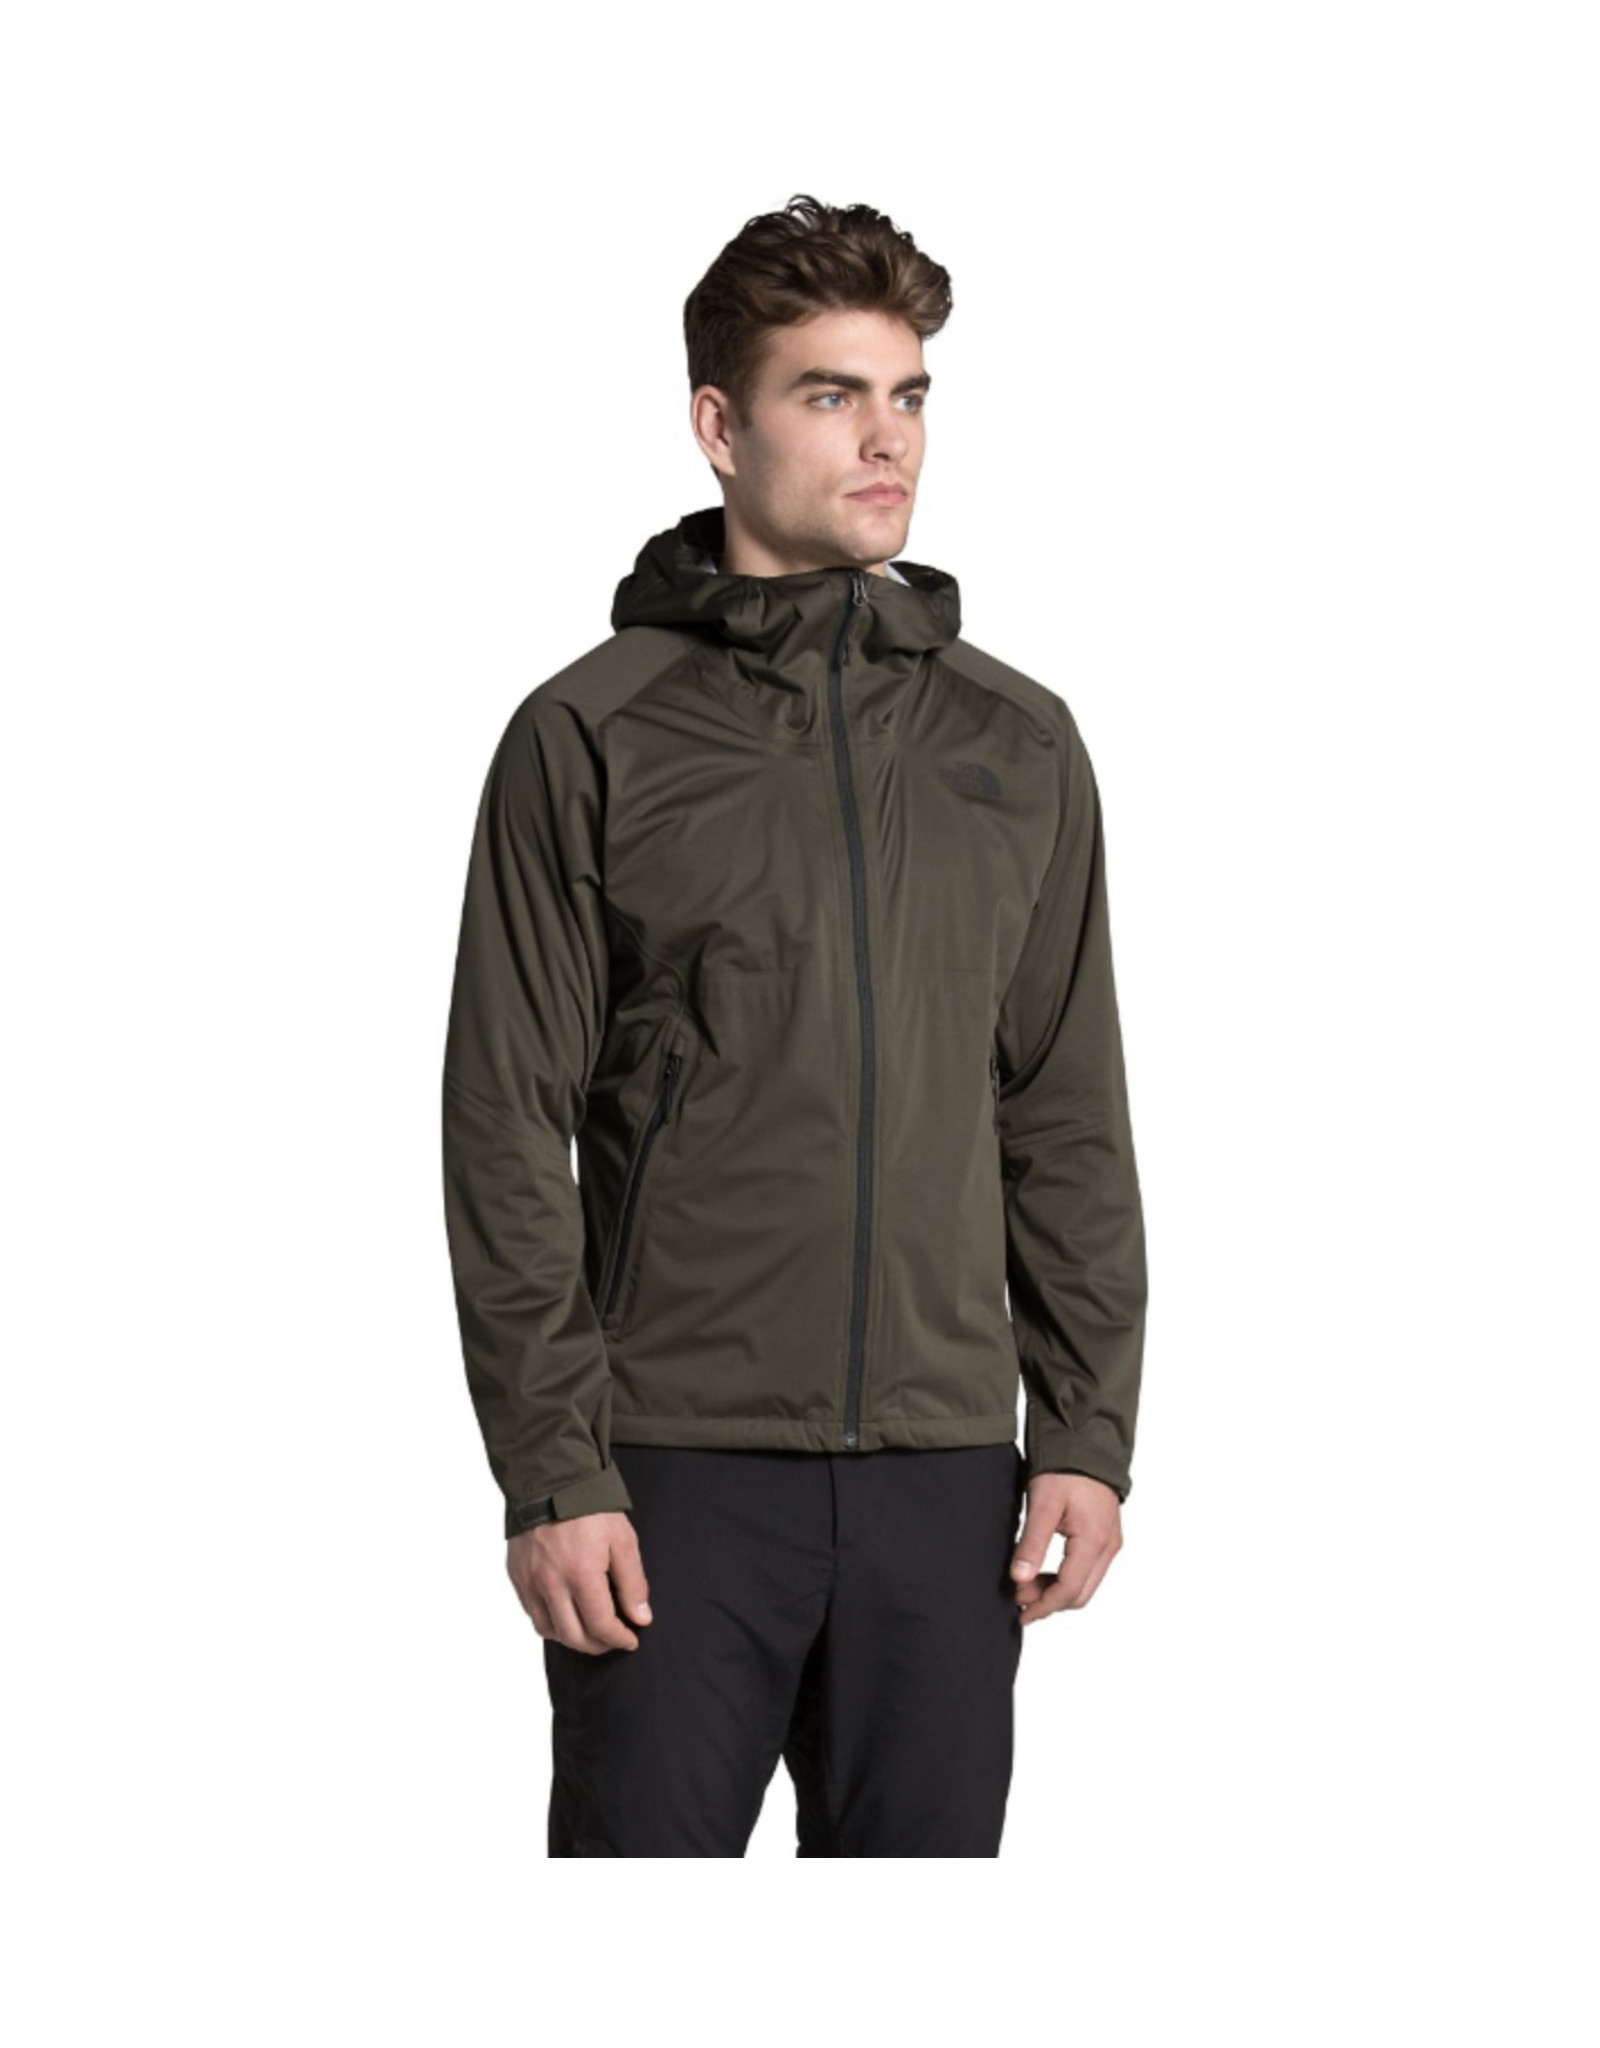 allproof stretch parka